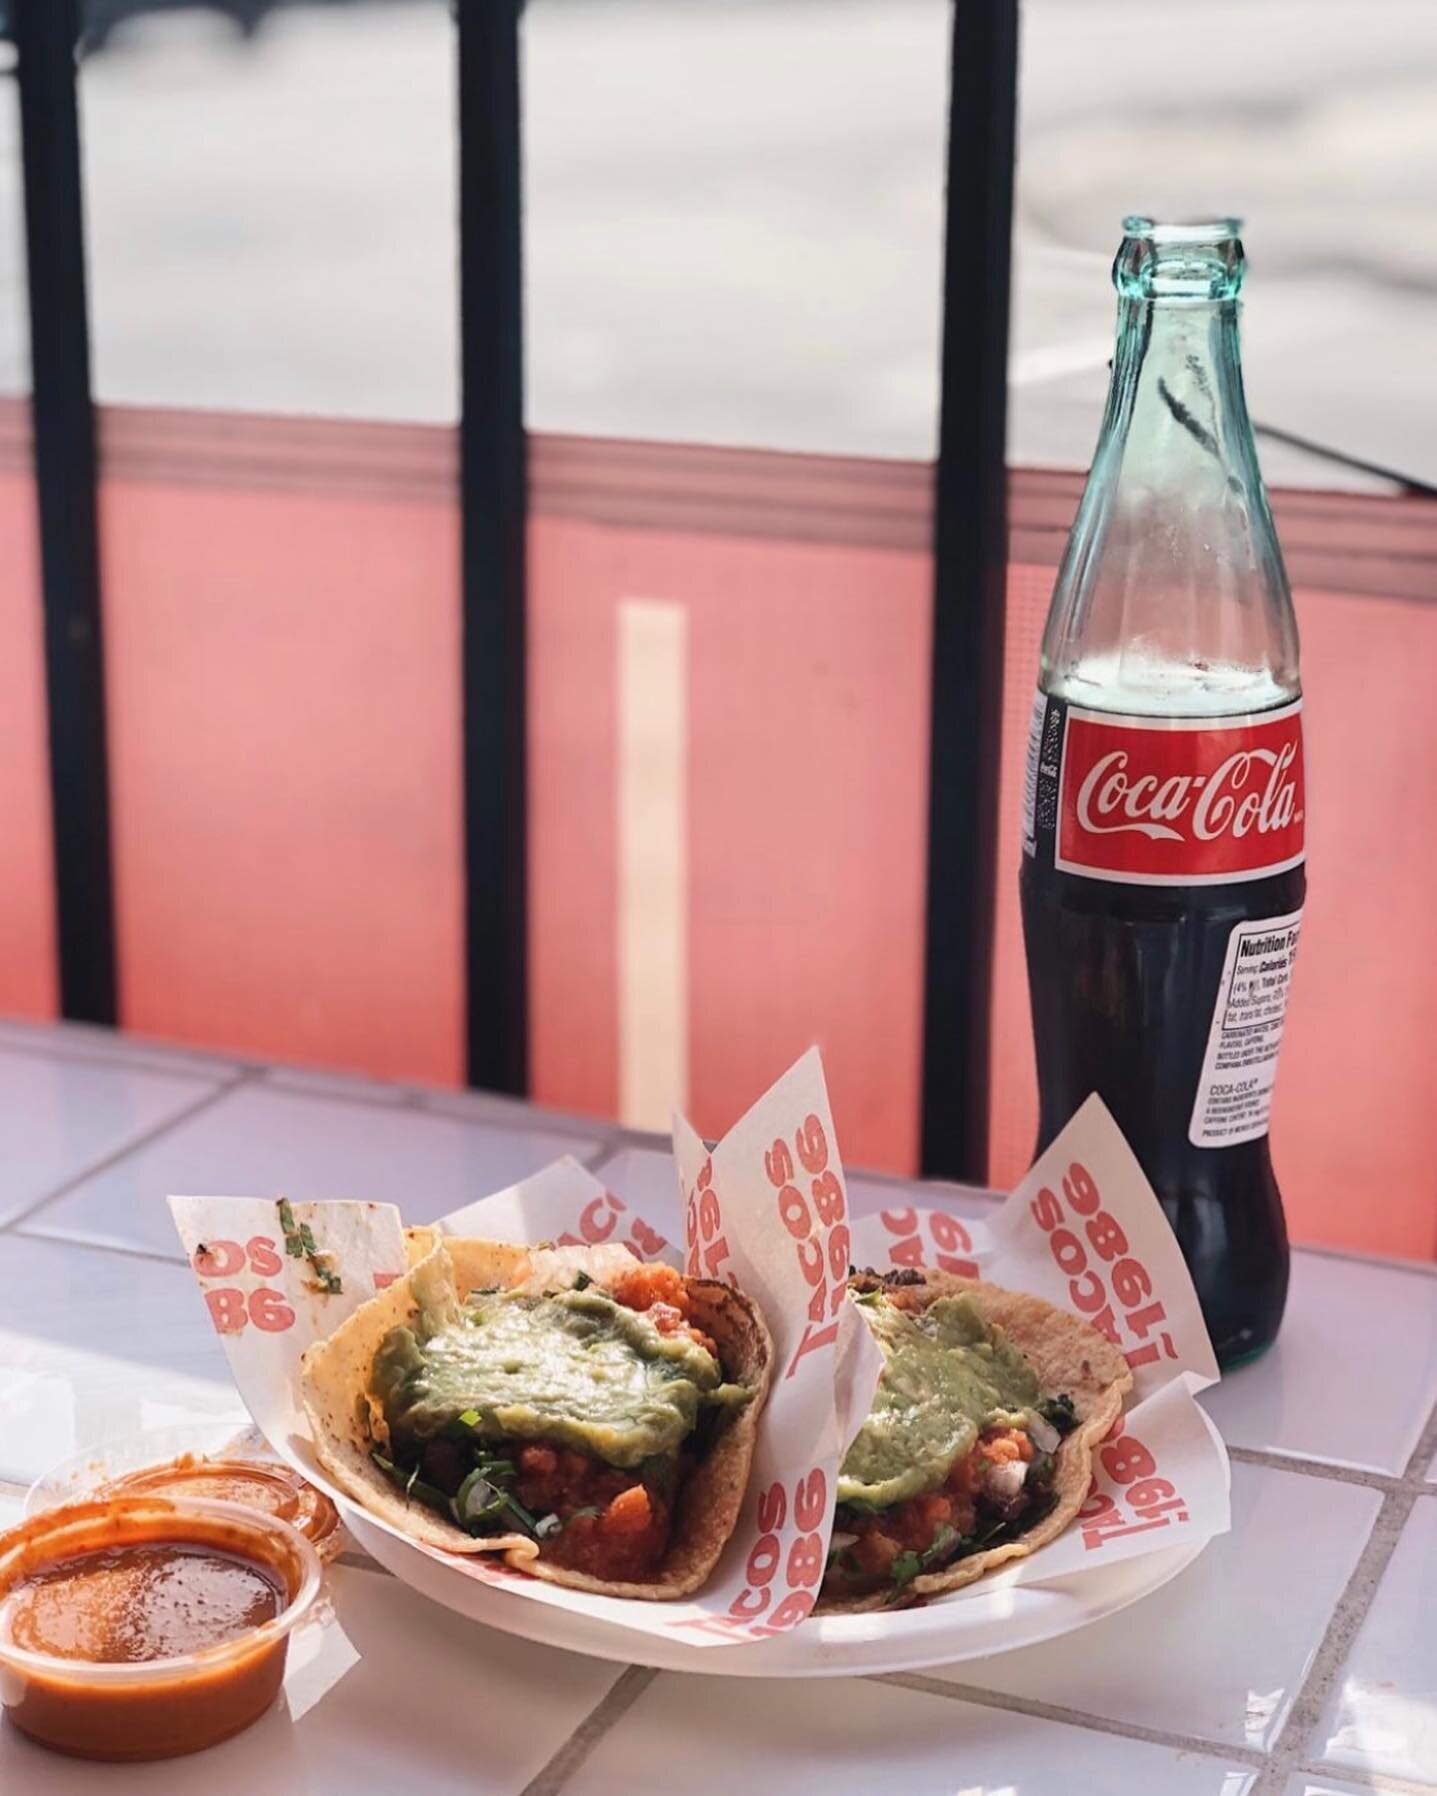 WE ARE OPEN FOR DINE IN - THANK YOU FOR THE CLOSE UP @rainyromero #DosTacos #UnaCoca #Provecho #WeLoveYouLA